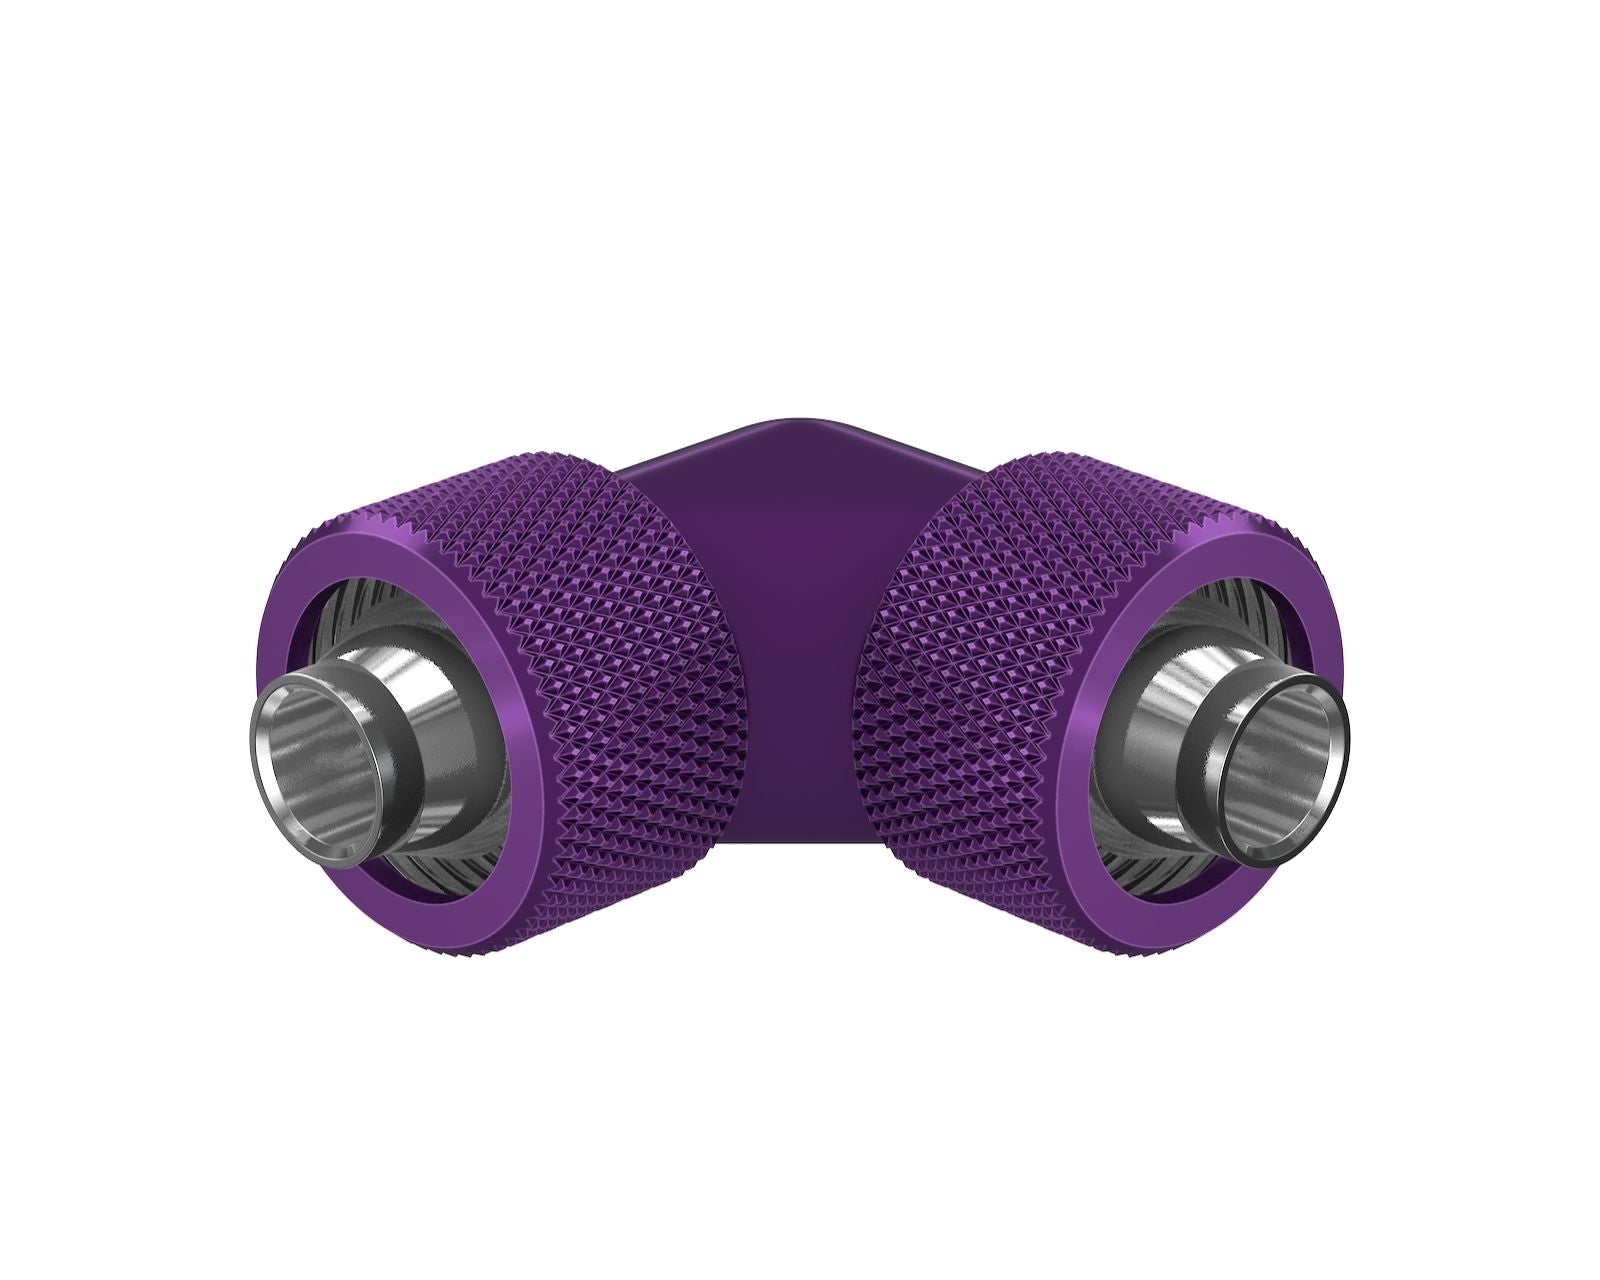 PrimoChill SecureFit SX - Premium 90 Degree Compression Fitting Set For 3/8in ID x 5/8in OD Flexible Tubing (F-SFSX5890) - Available in 20+ Colors, Custom Watercooling Loop Ready - Candy Purple